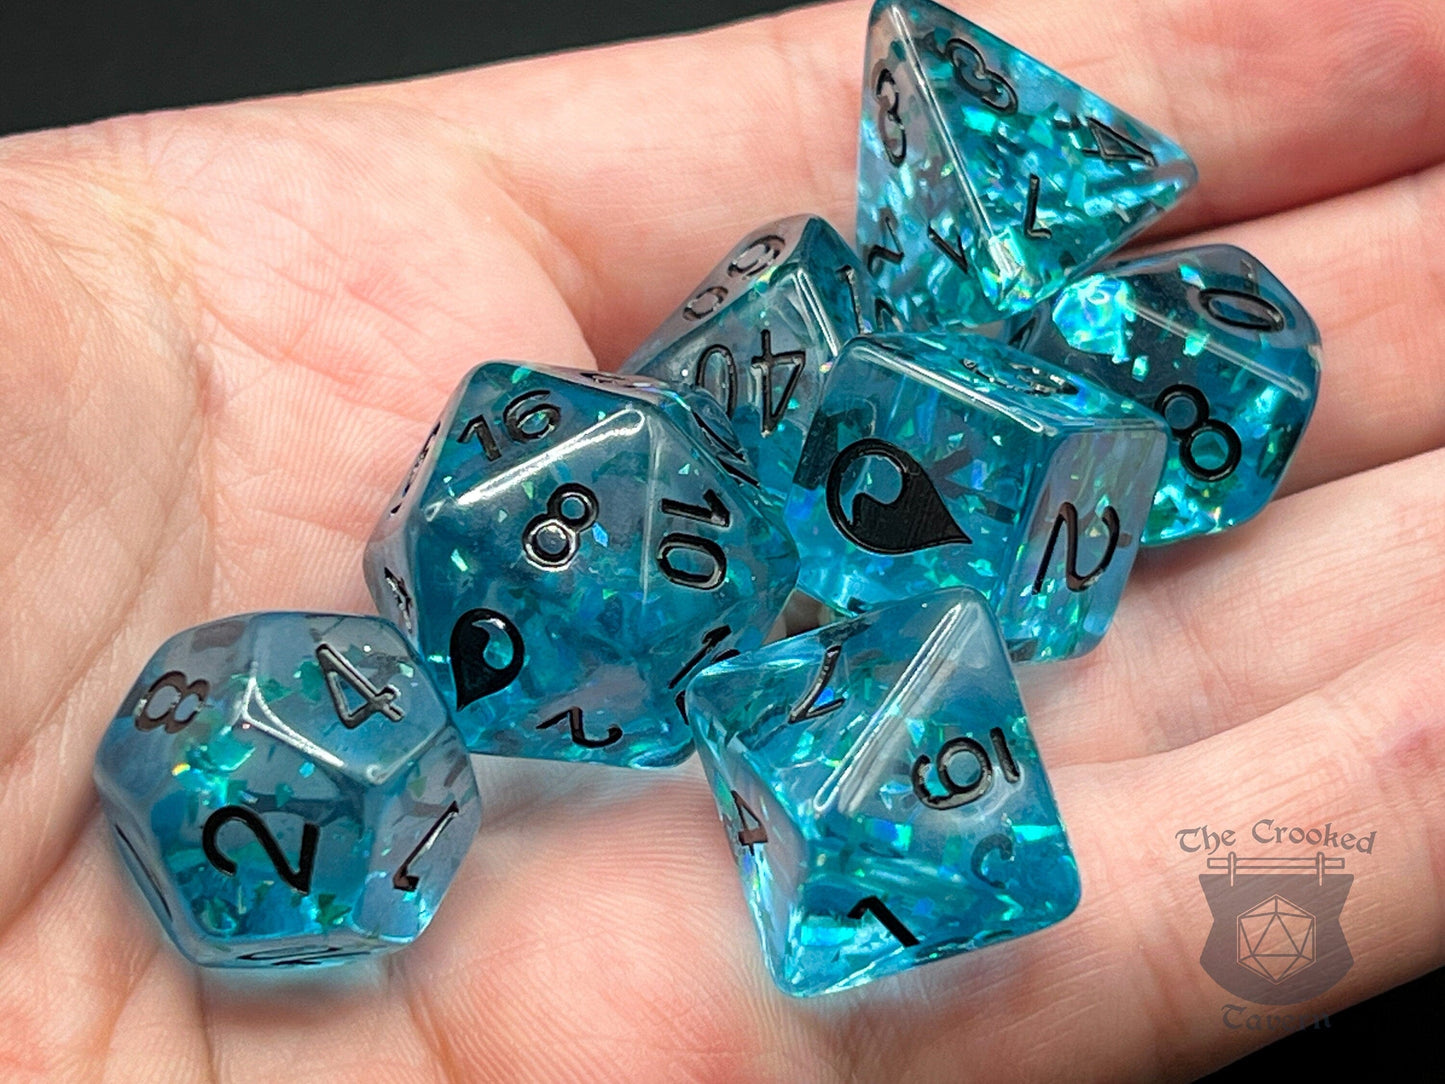 The Crooked Tavern Tidebreaker DnD Dice Set | Colorful Glitter, Water Engraving | Exclusive Water-Themed Dungeons & Dragons TTRPG Dice Set